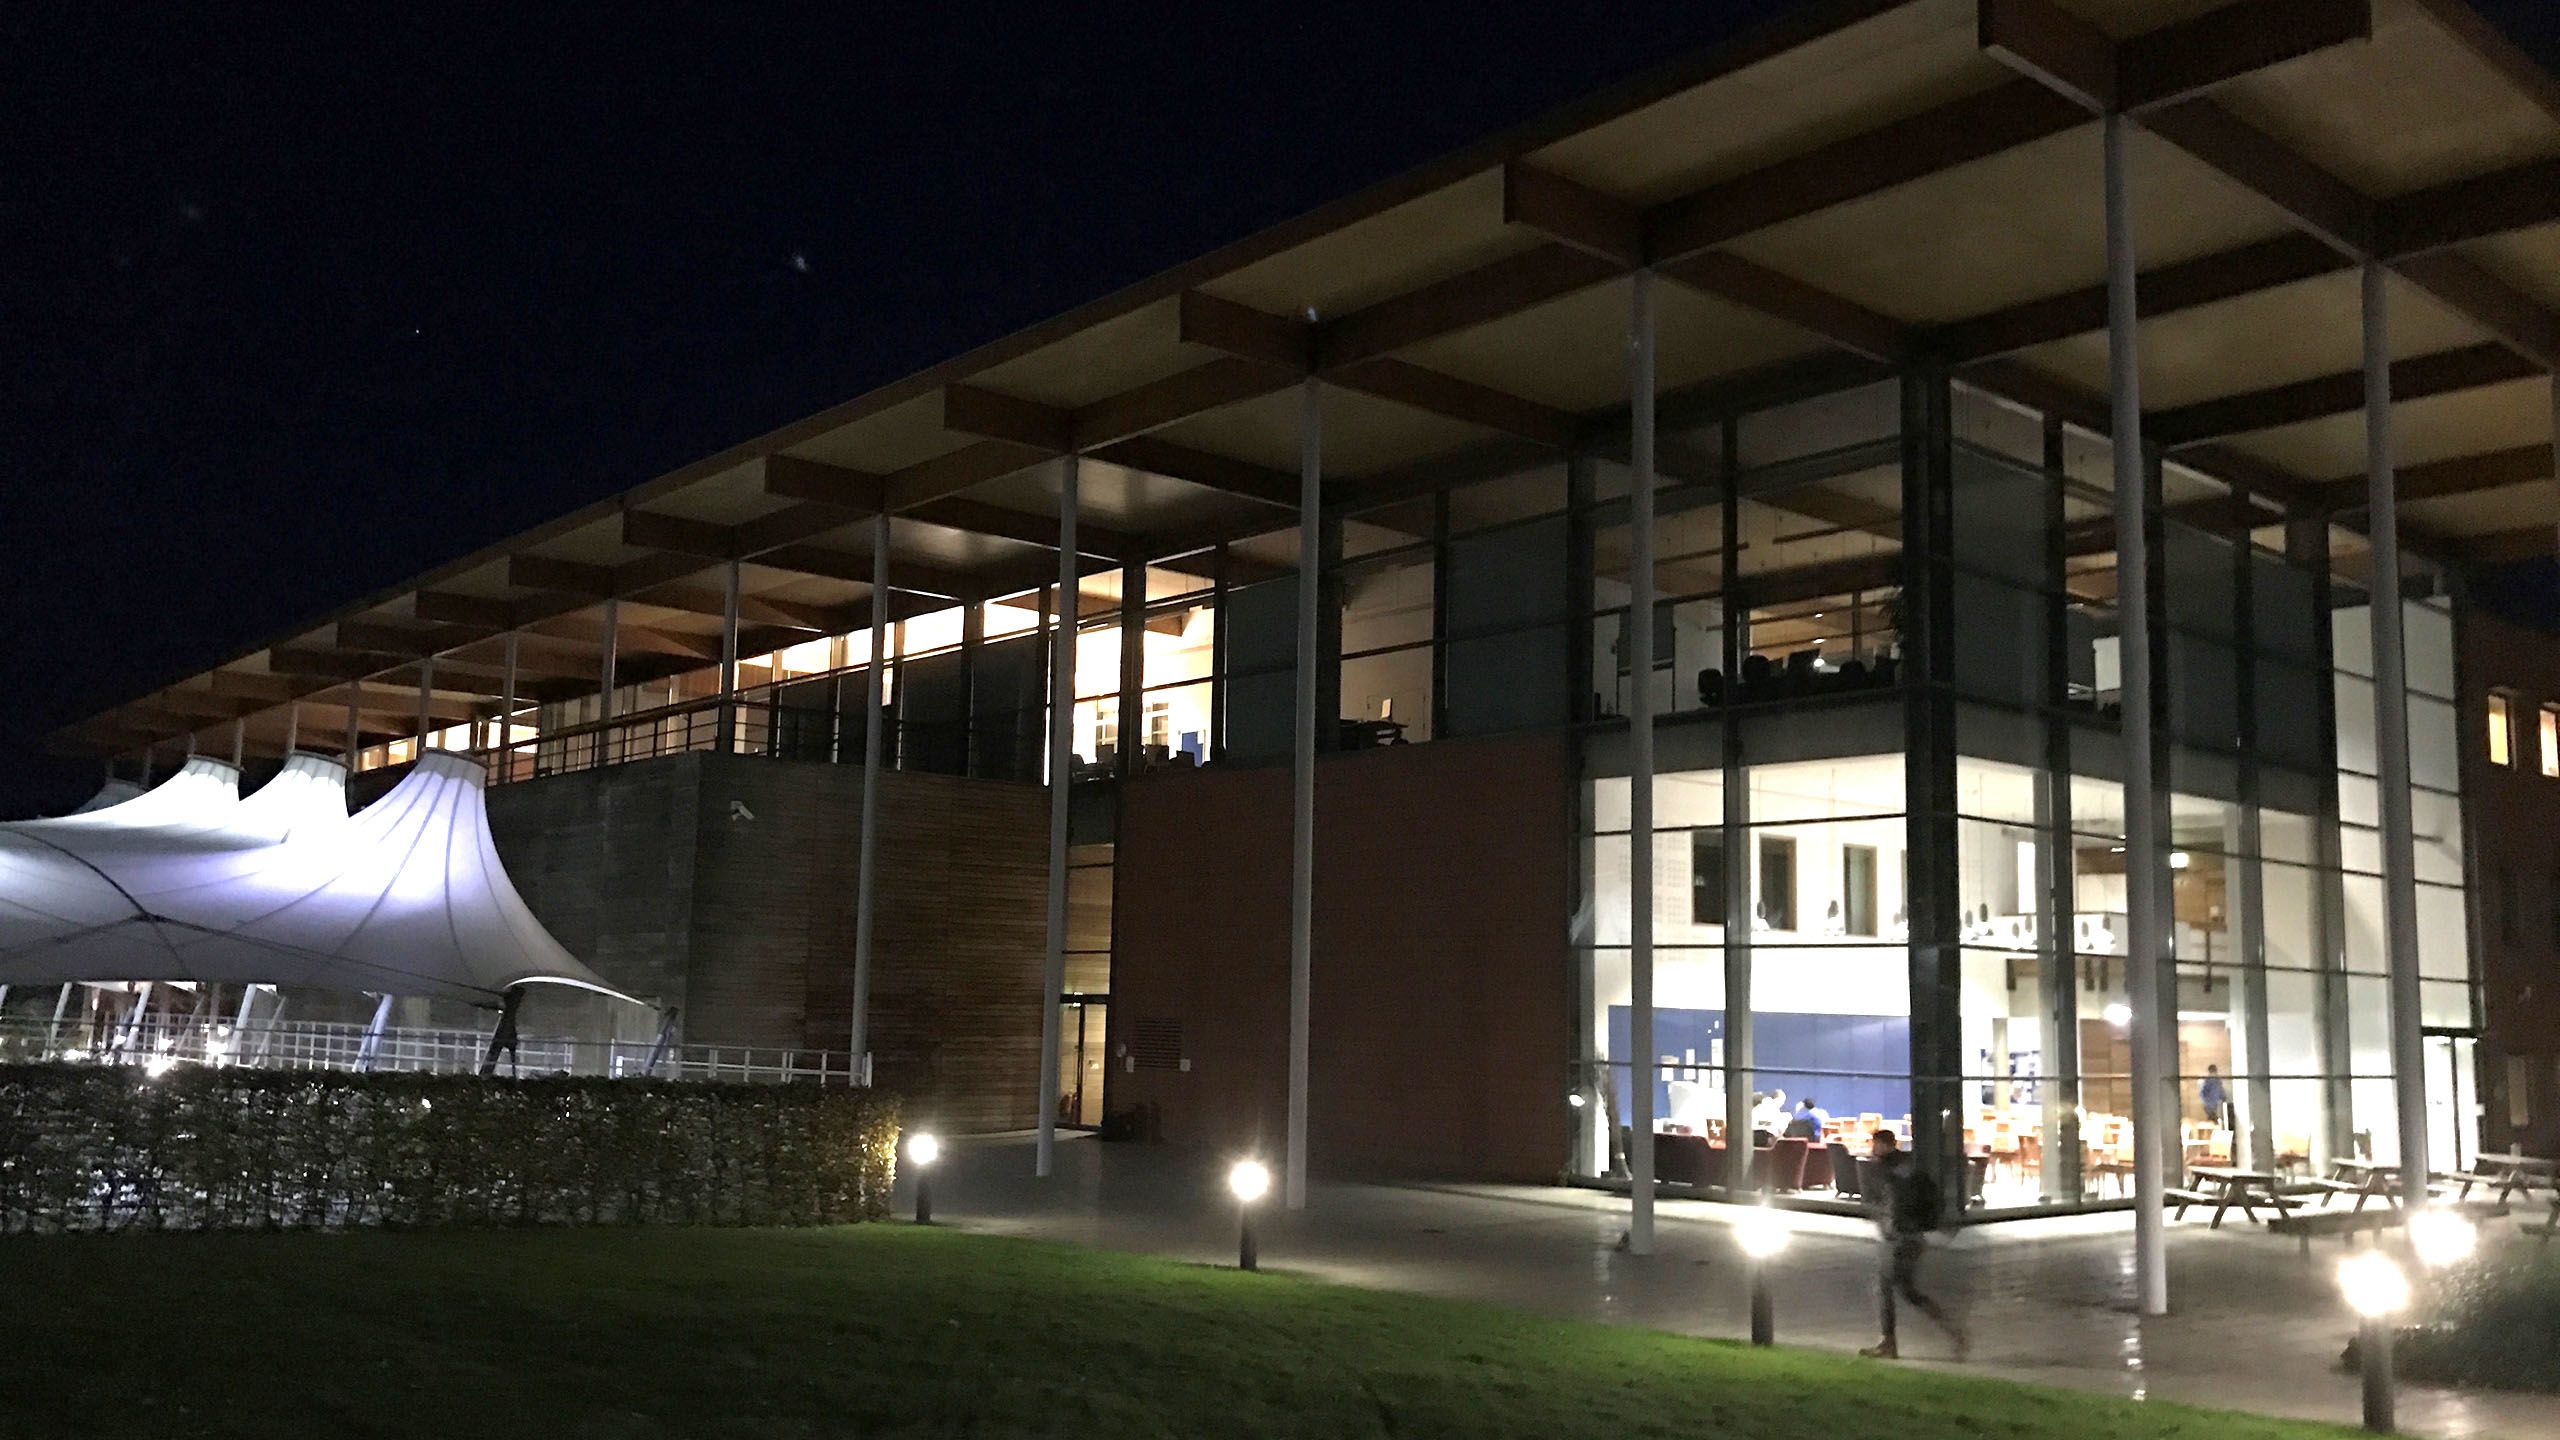 Giovanna Maria Dimitri's photo, Dark Lab, is an atmospheric image of our Department building at night.